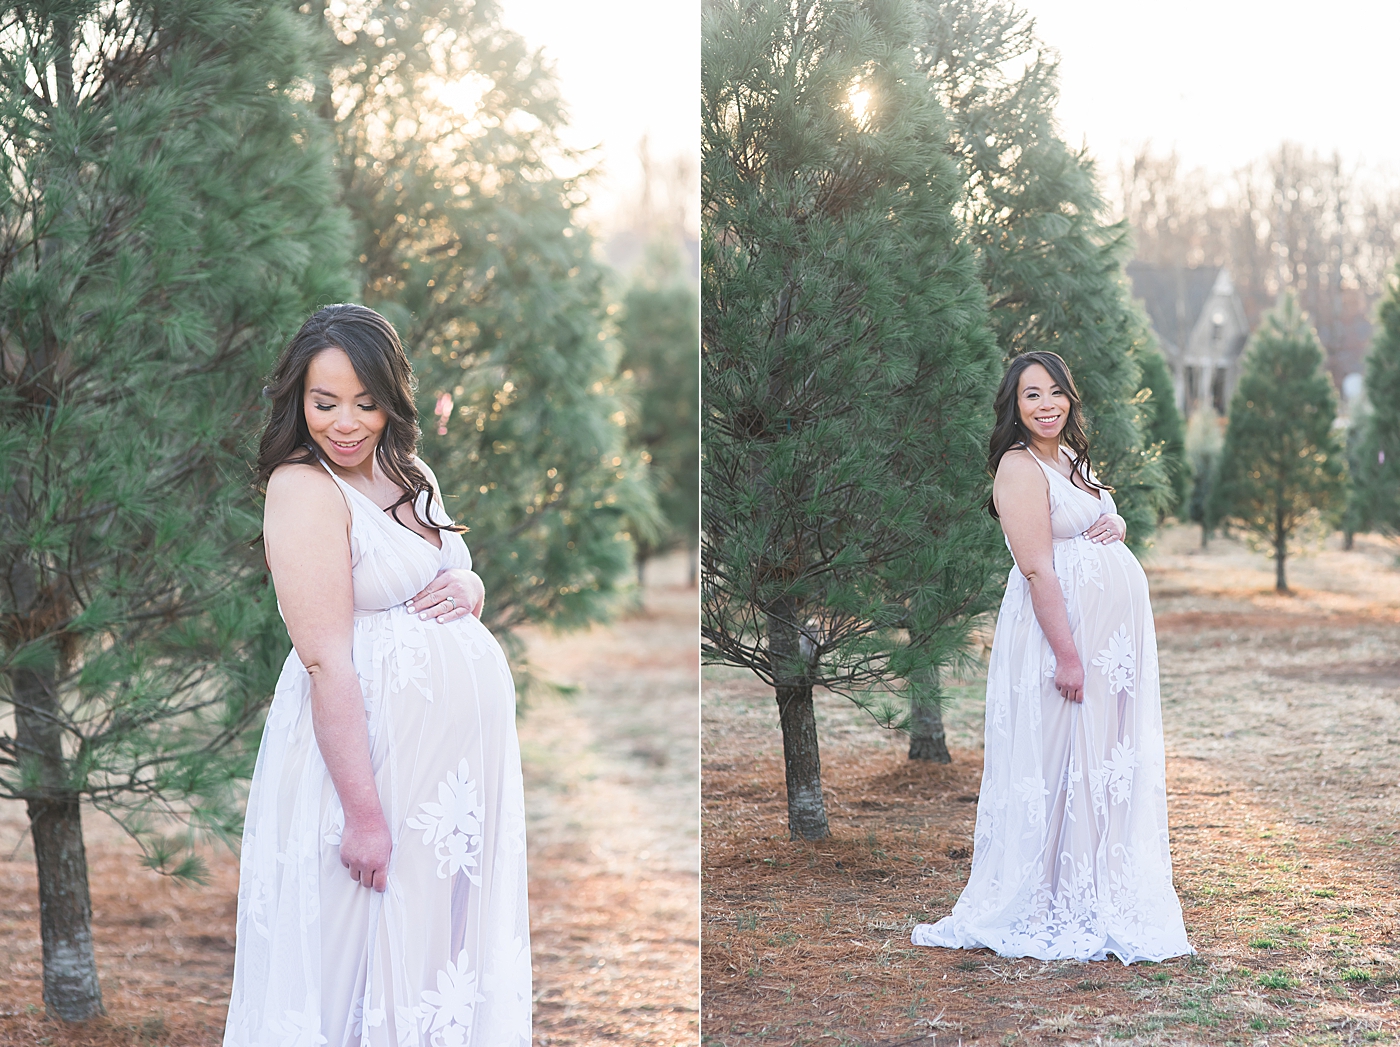 Mom to be in lace dress looking at her belly | Photo by Anna Wisjo Photography